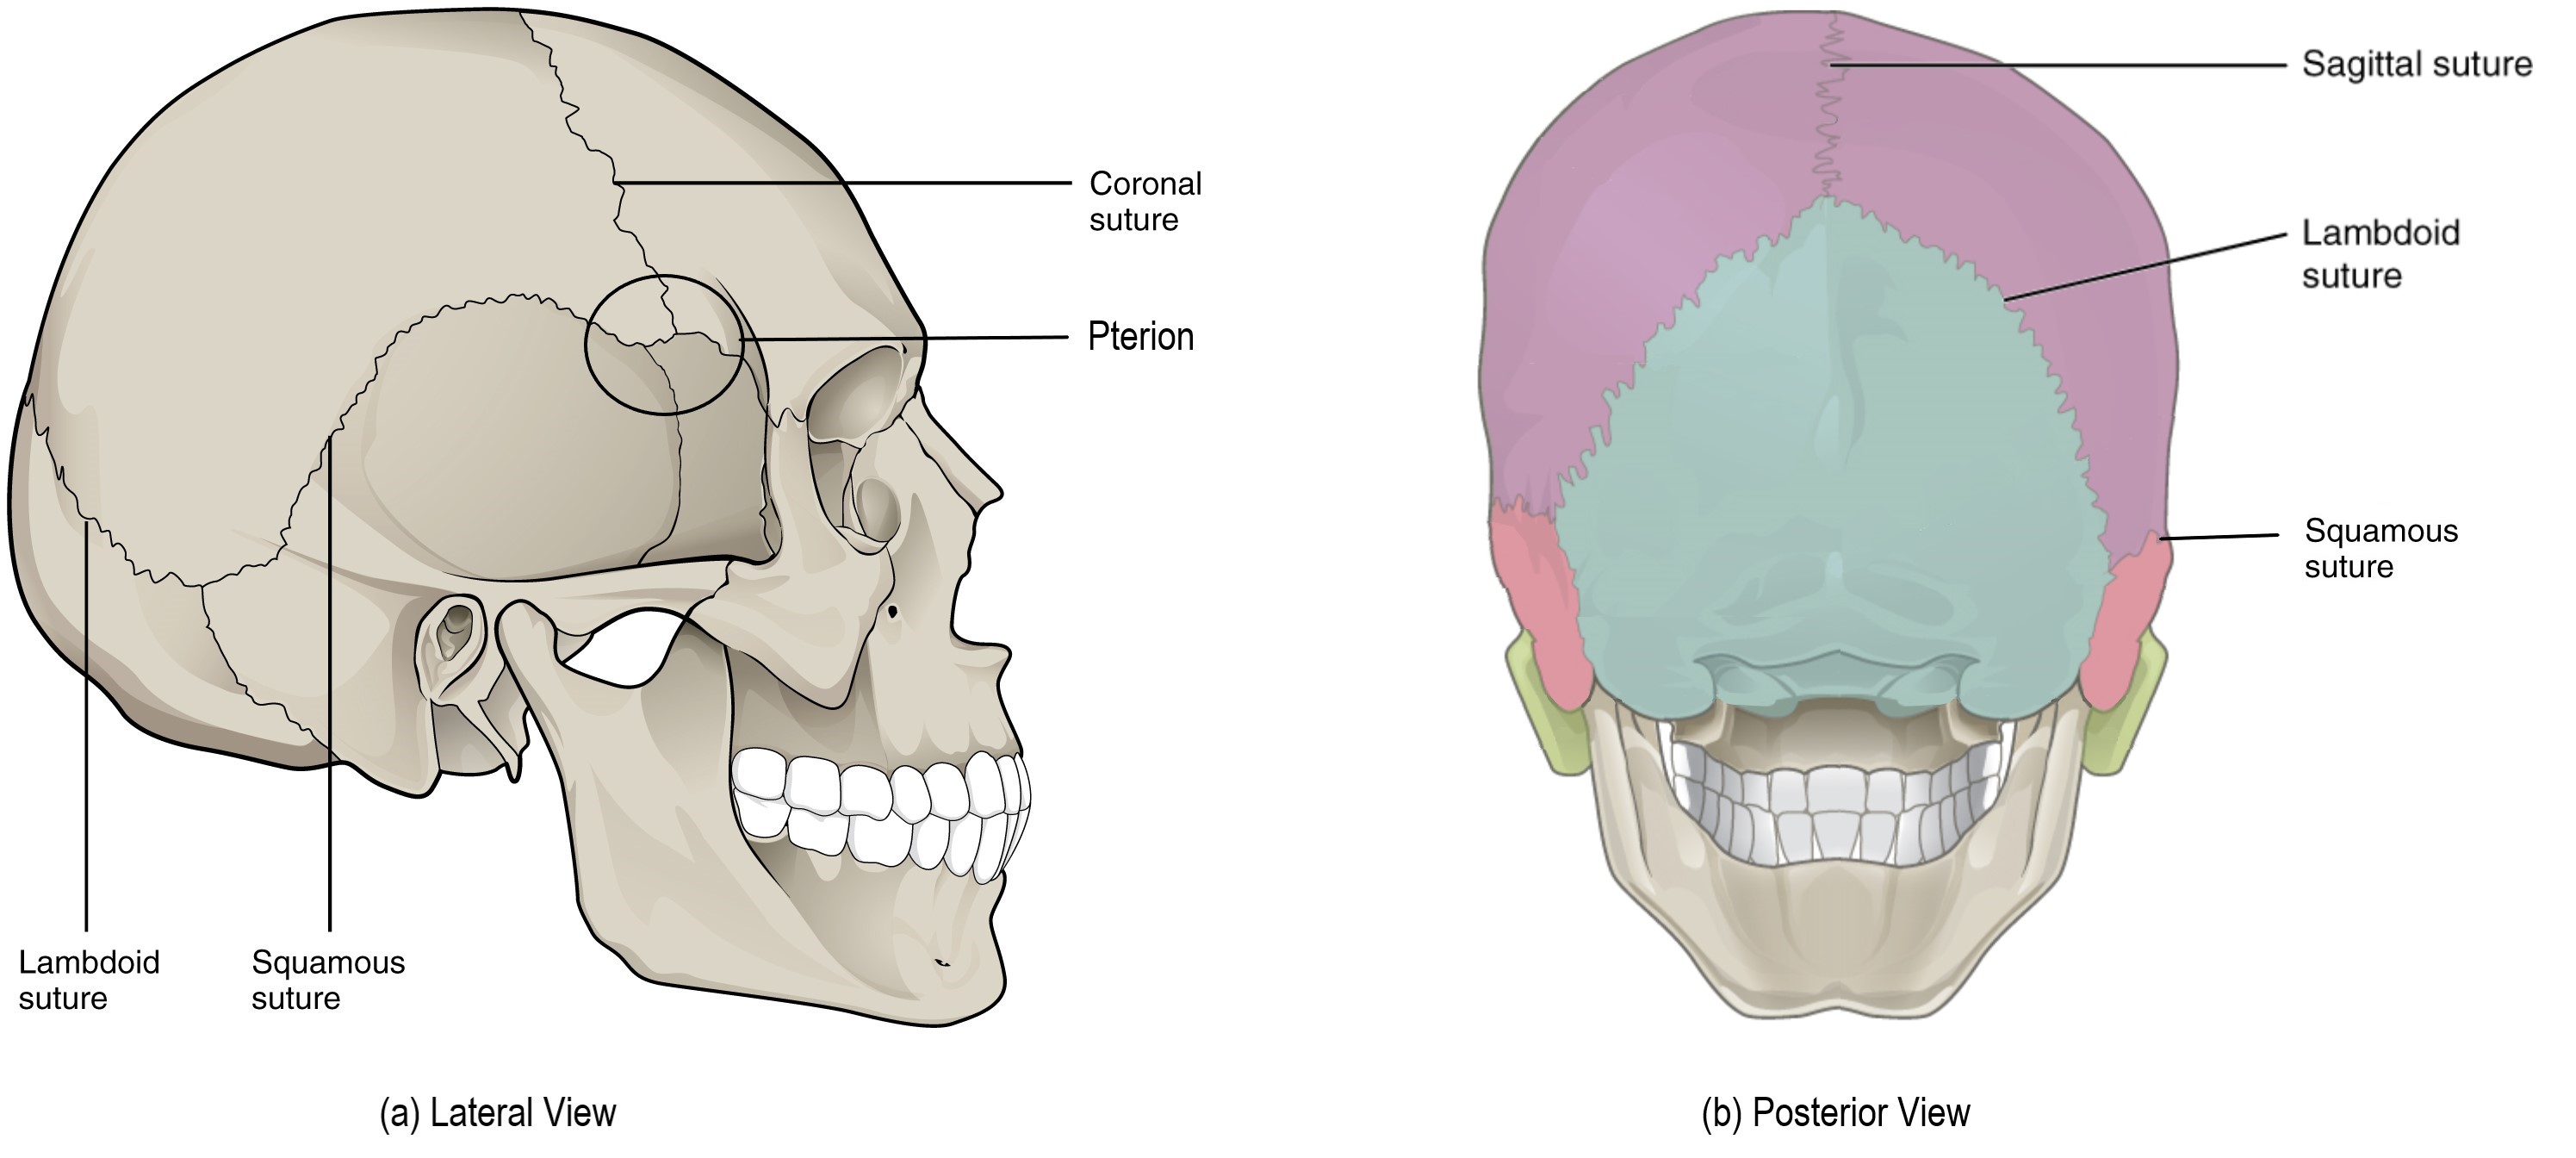 Sutures of the skull from the lateral and posterior views